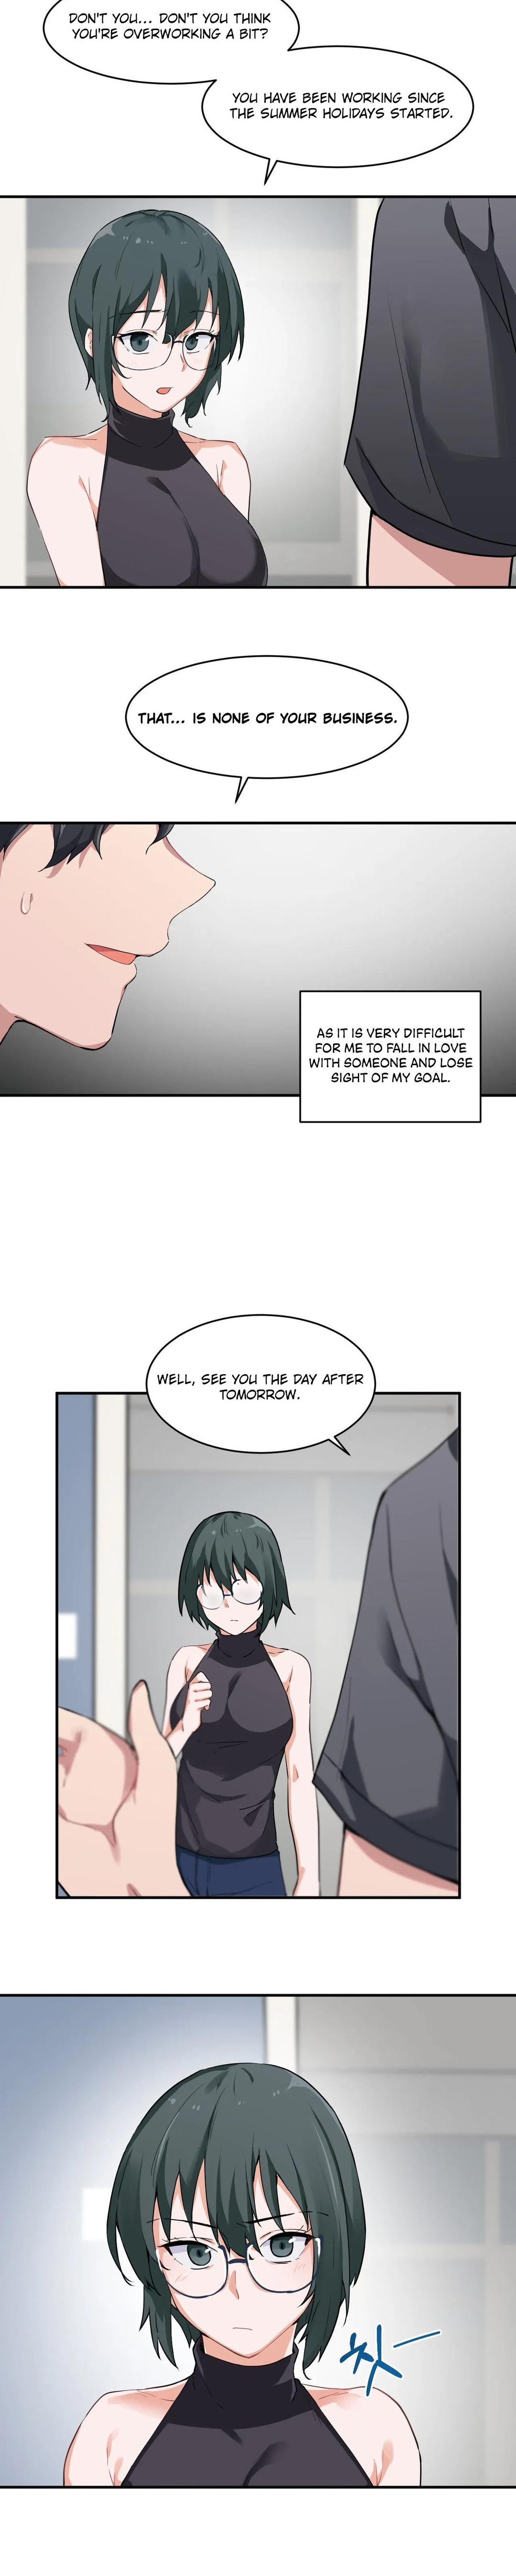 Heart Stealer Chapter 1 - Page 16